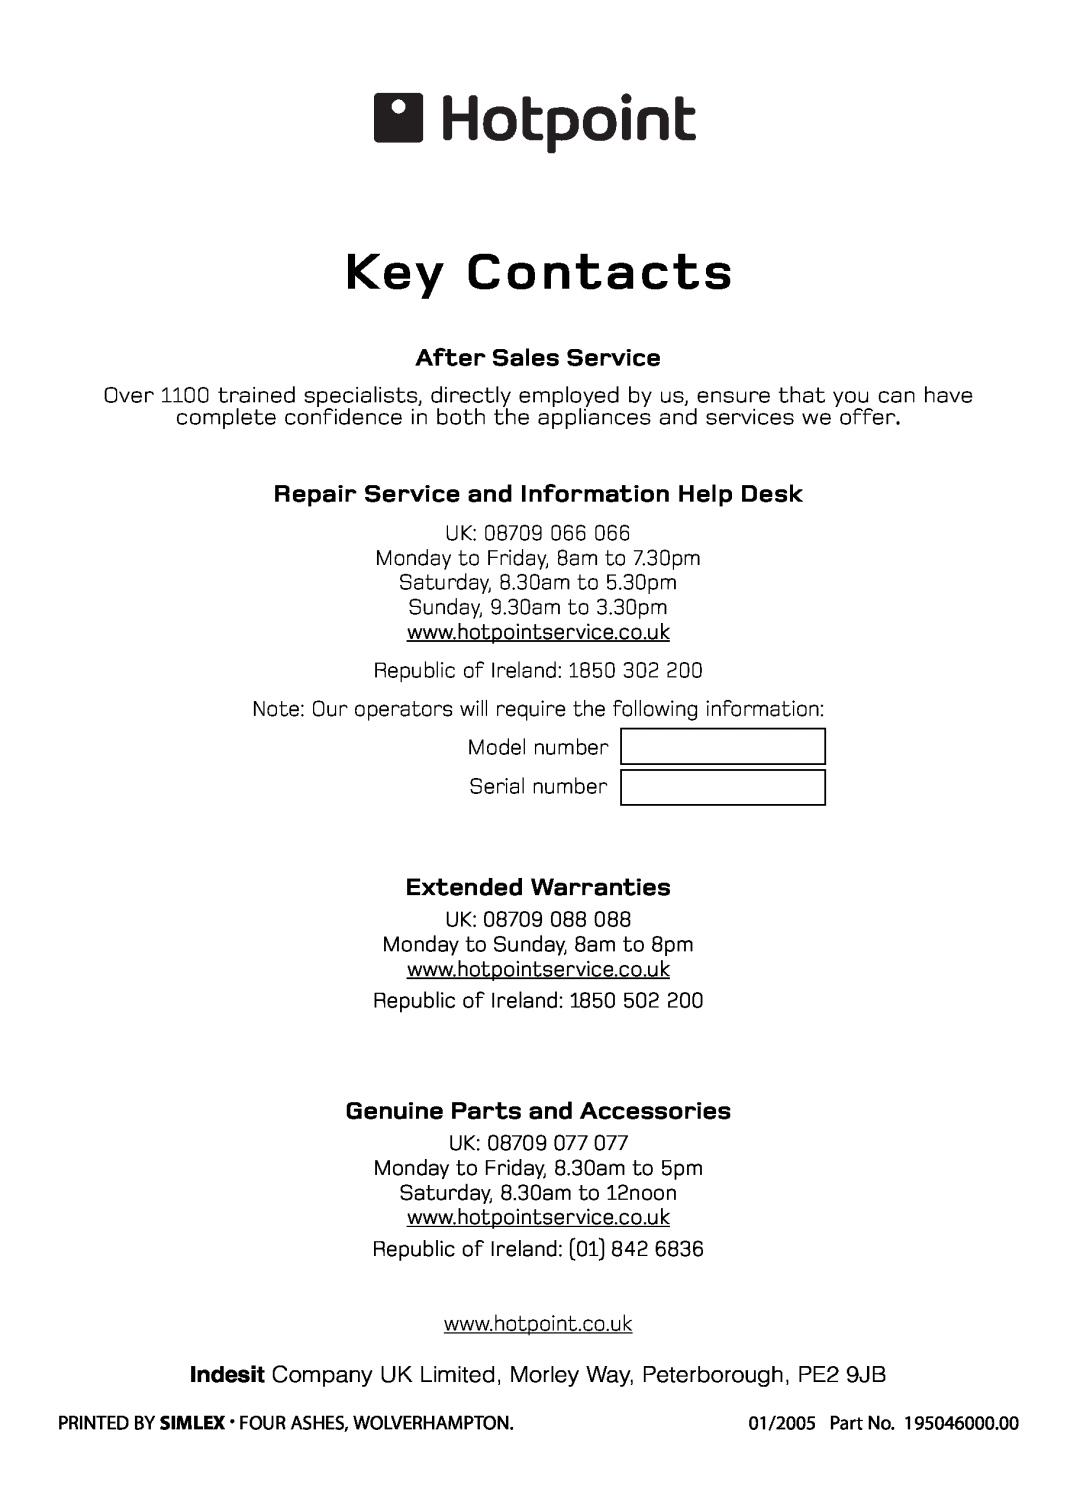 Hotpoint S220E manual Key Contacts, After Sales Service, Repair Service and Information Help Desk, Extended Warranties 